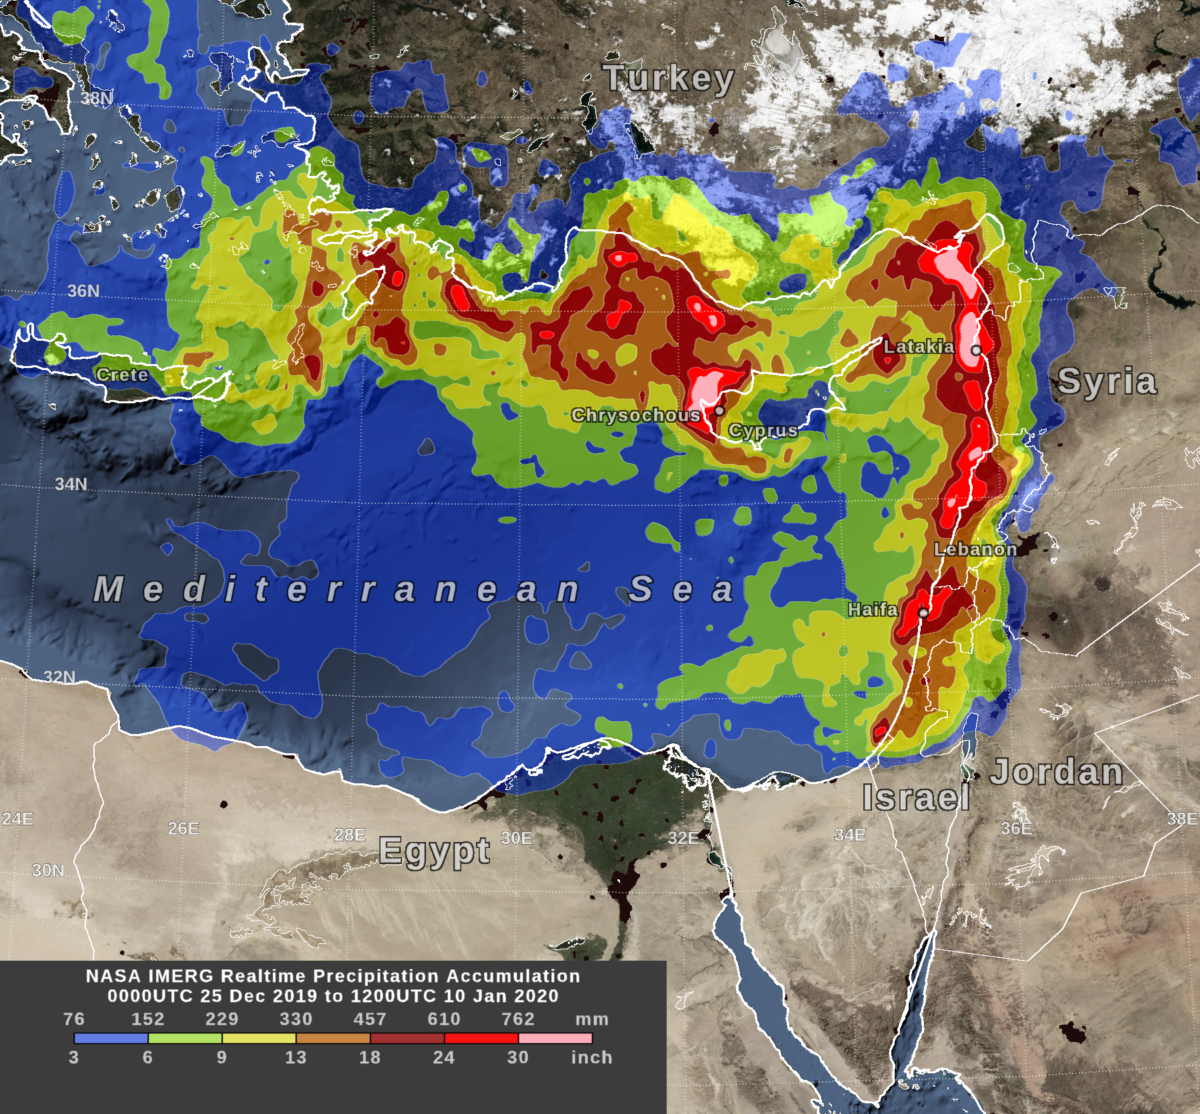 IMERG estimate of two weeks of heavy rainfall over the Mediterranean